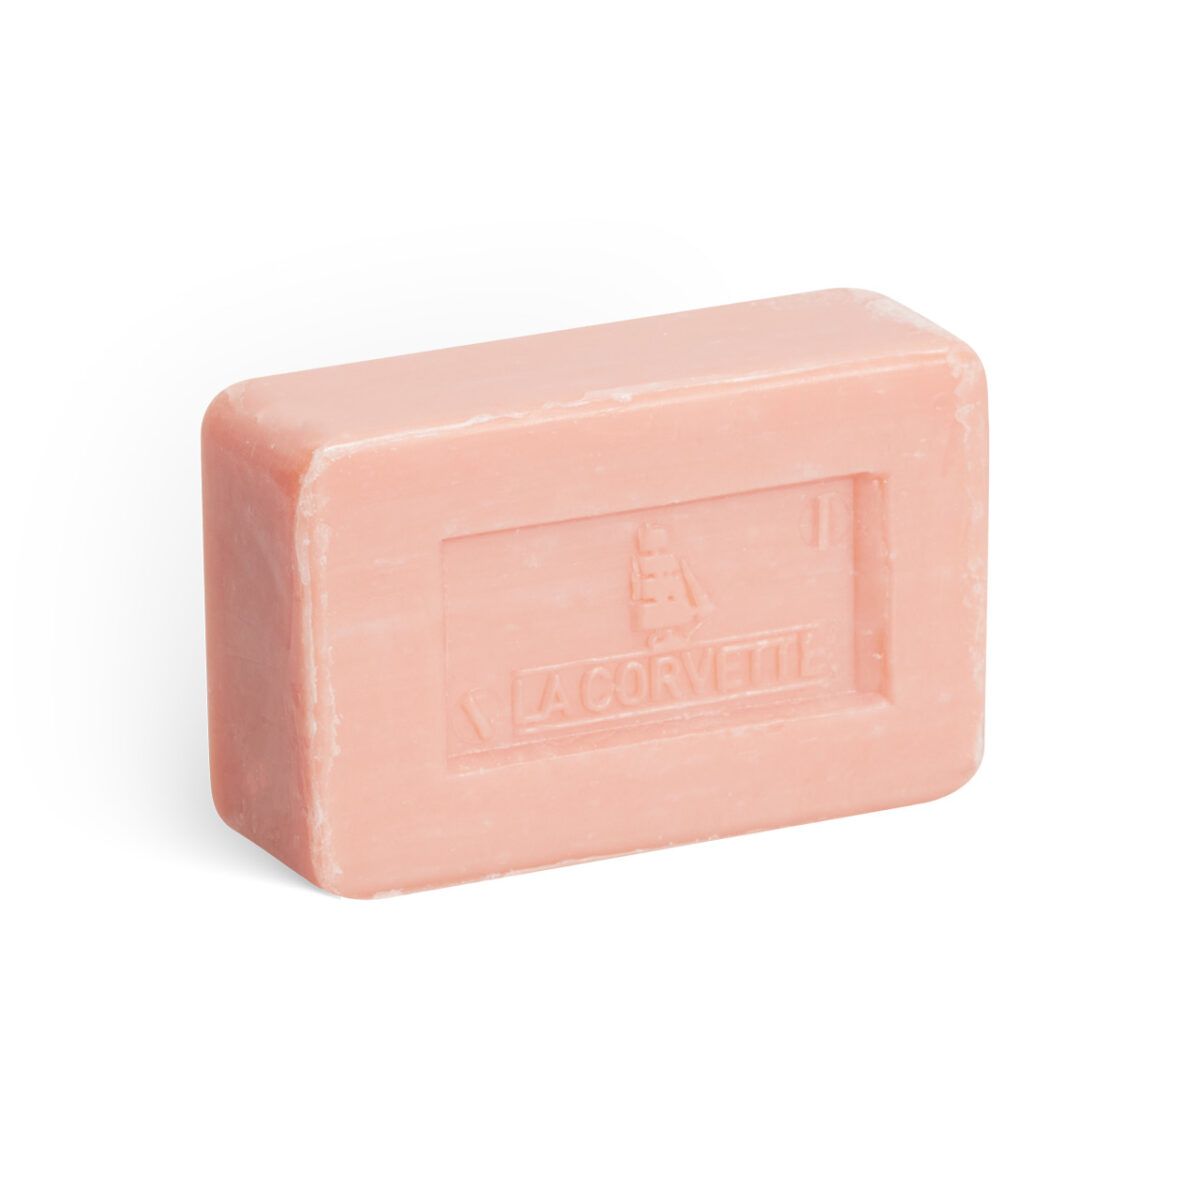 Provence rose scented soap 100g